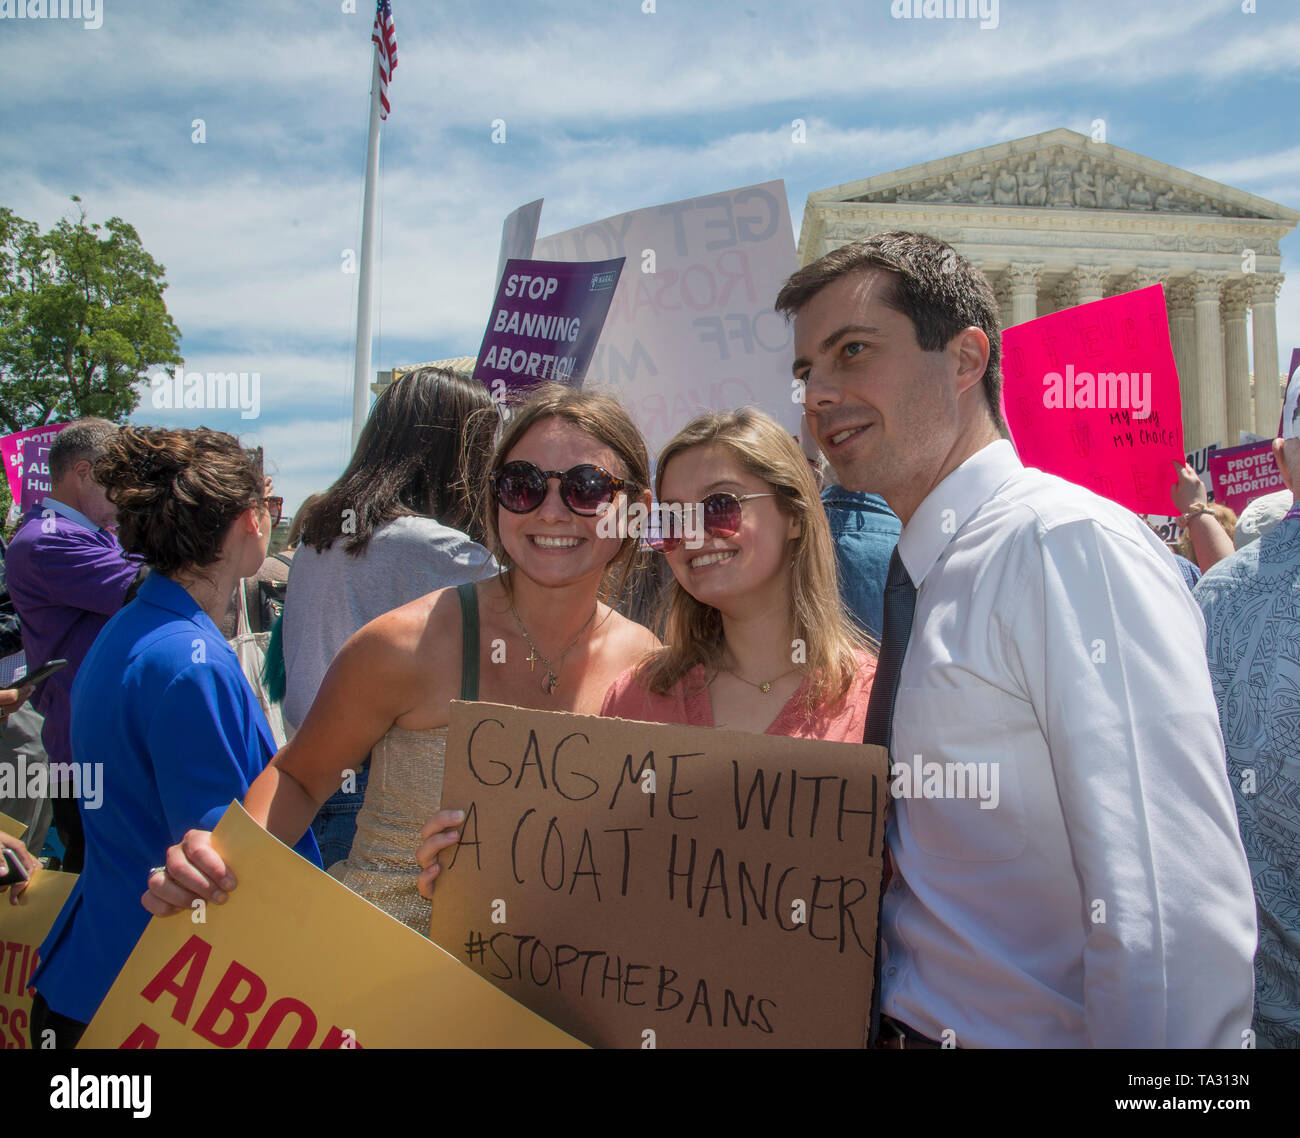 Washington DC , May 21, 2019, USA: Democratic Presidential hopeful, Pete Buttigier made an appearance at the rally where Pro-choice supporters gather  Stock Photo